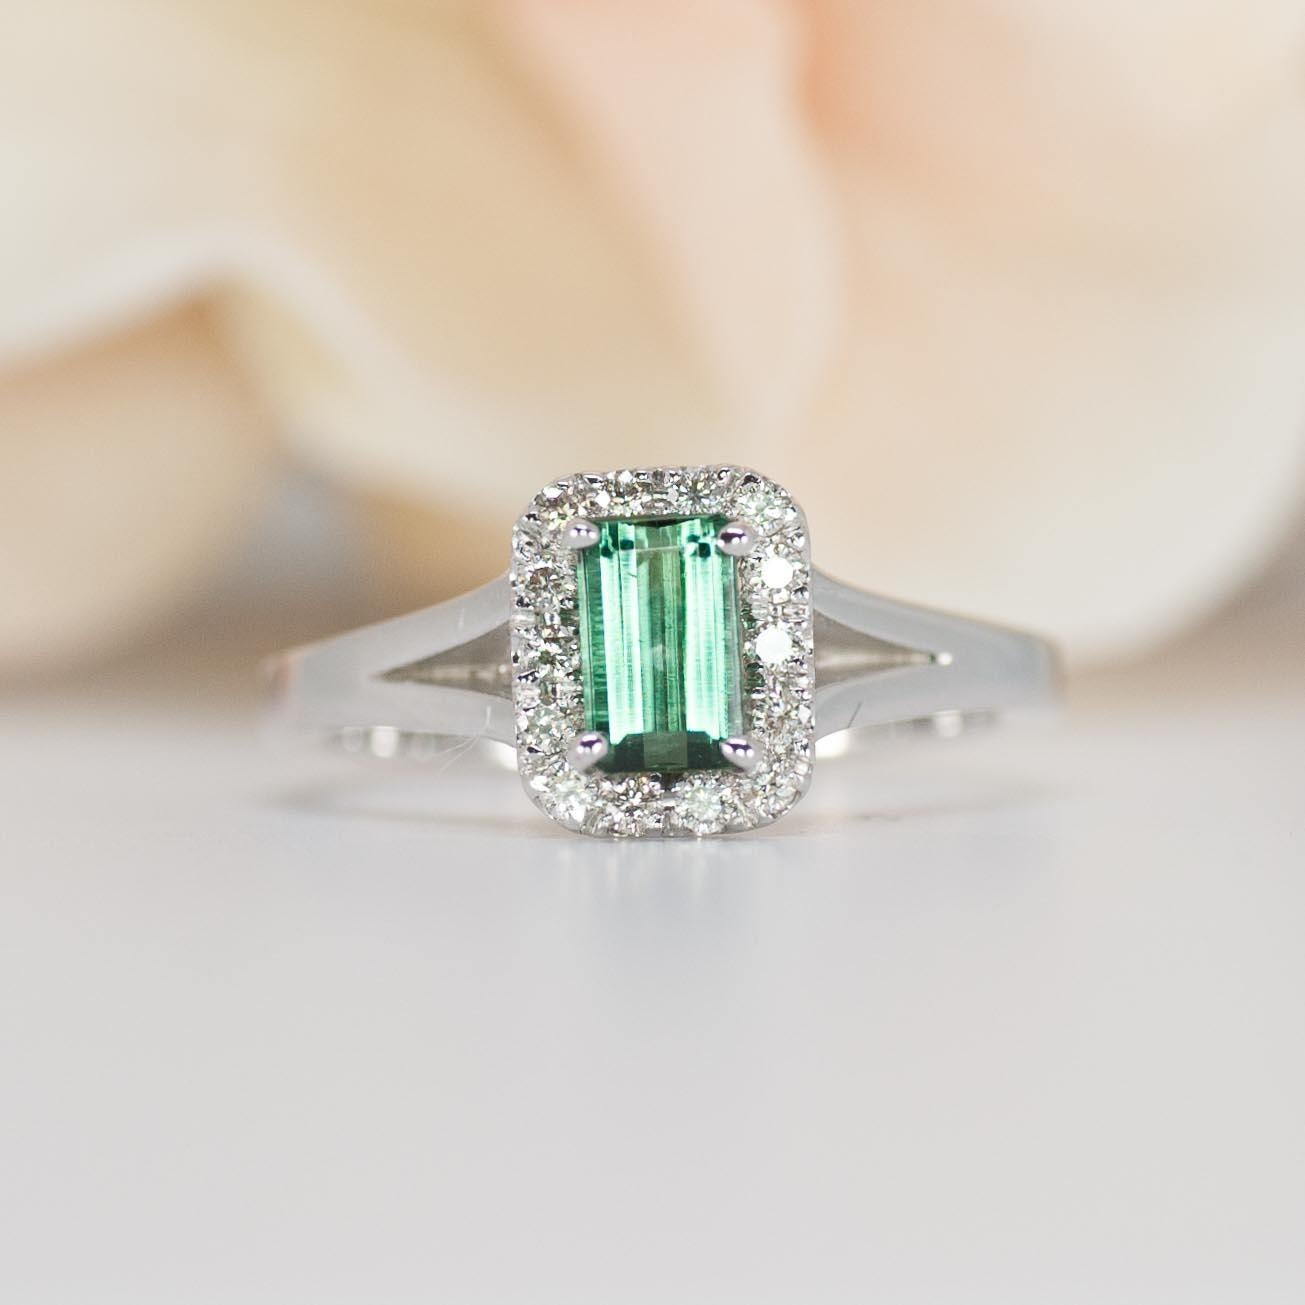 This emerald cut engagement ring features a vibrant, inclusion free green tourmaline with a sparkling halo of diamonds.

This tourmaline engagement ring is perfect for couples on a budget. The green color of the tourmaline is very much like the